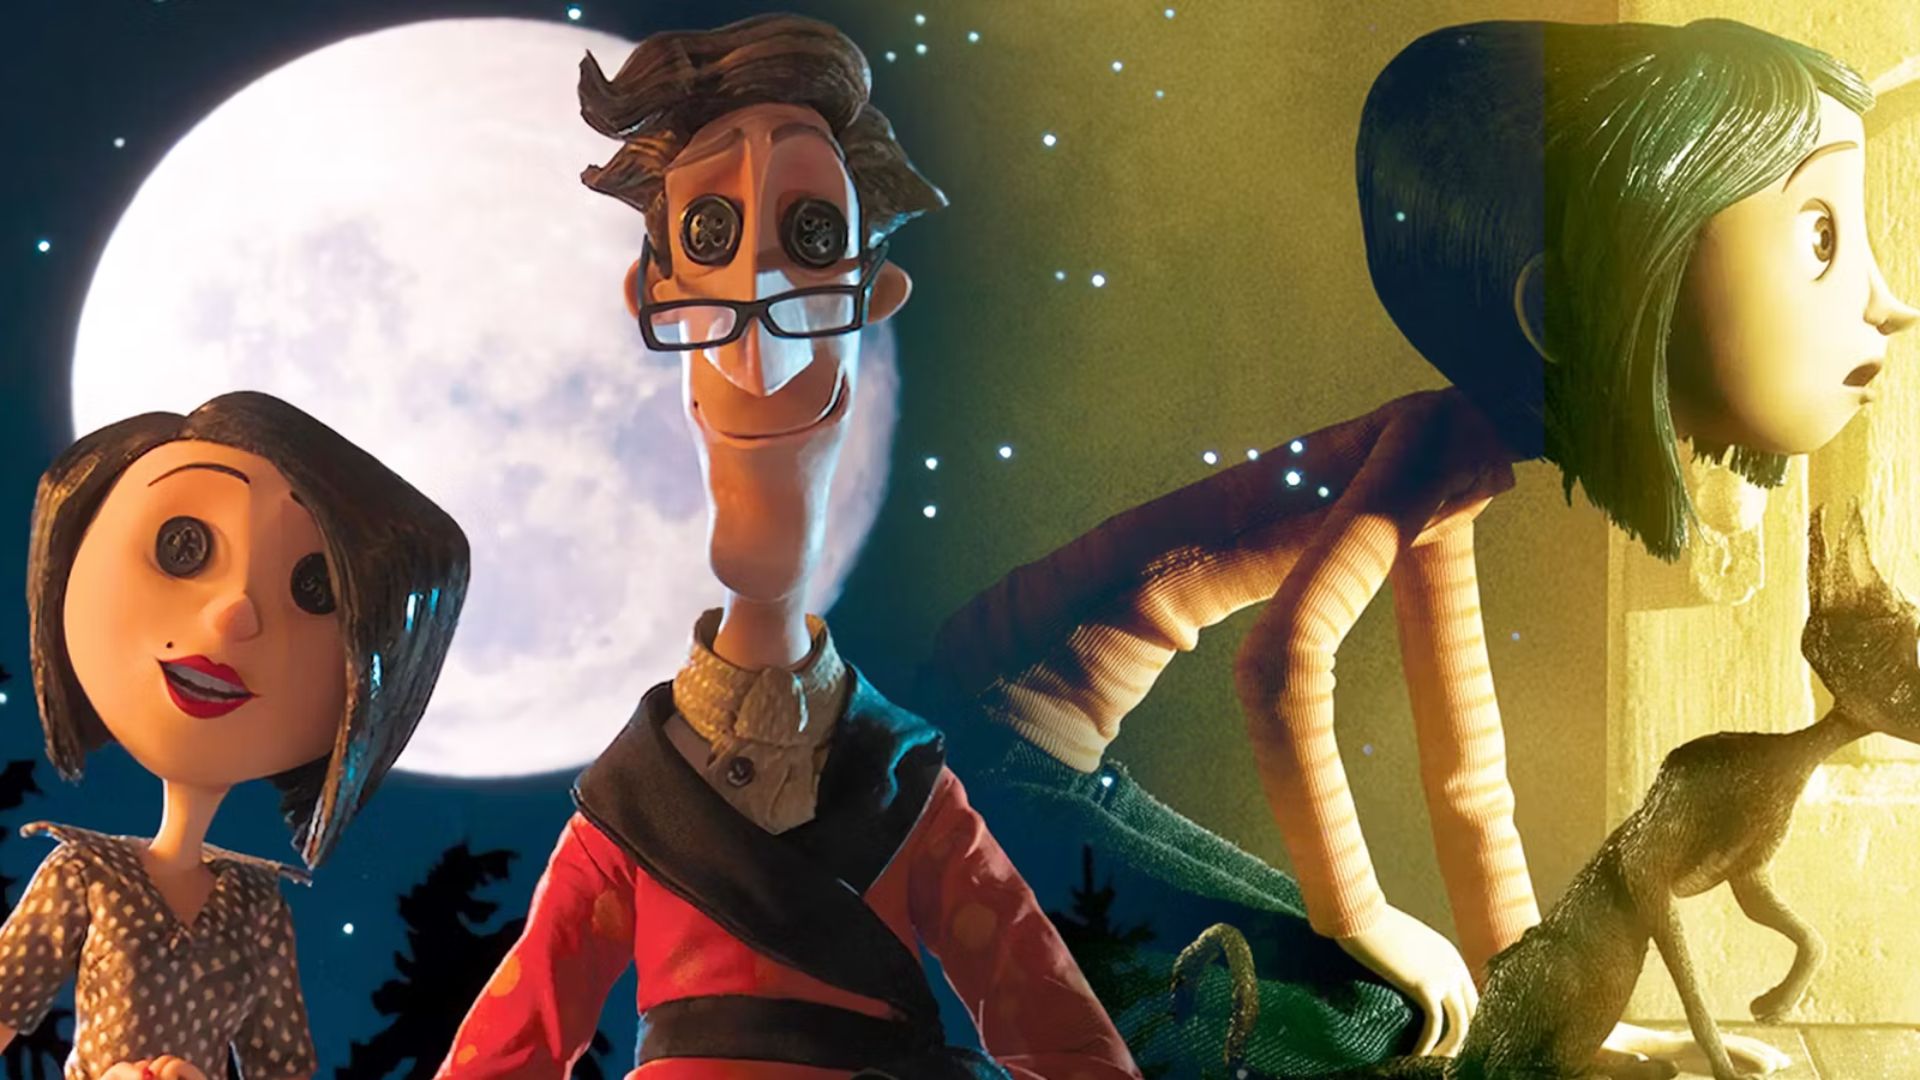 Is There Any Truth To Coraline 2 Release Date Rumors?